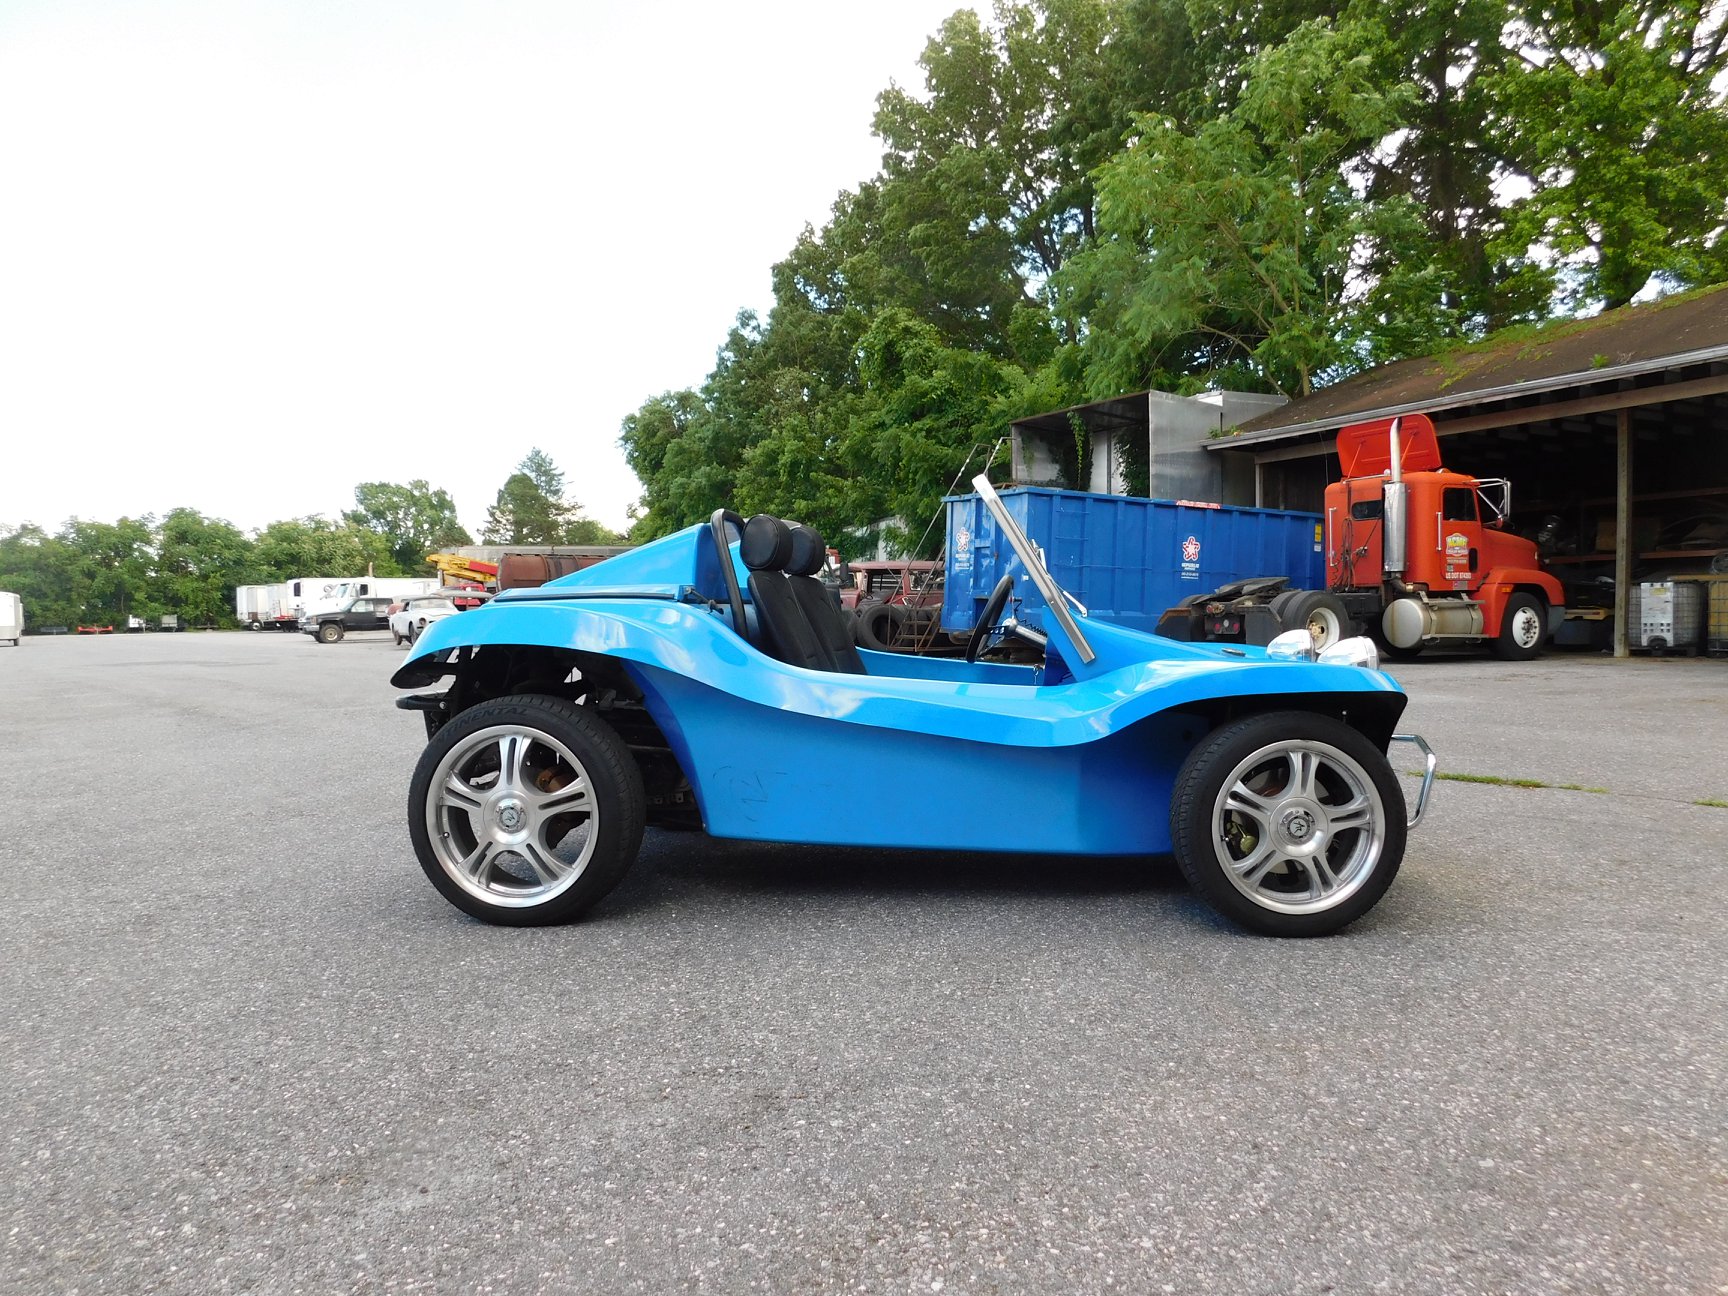 dune buggy dealers near me